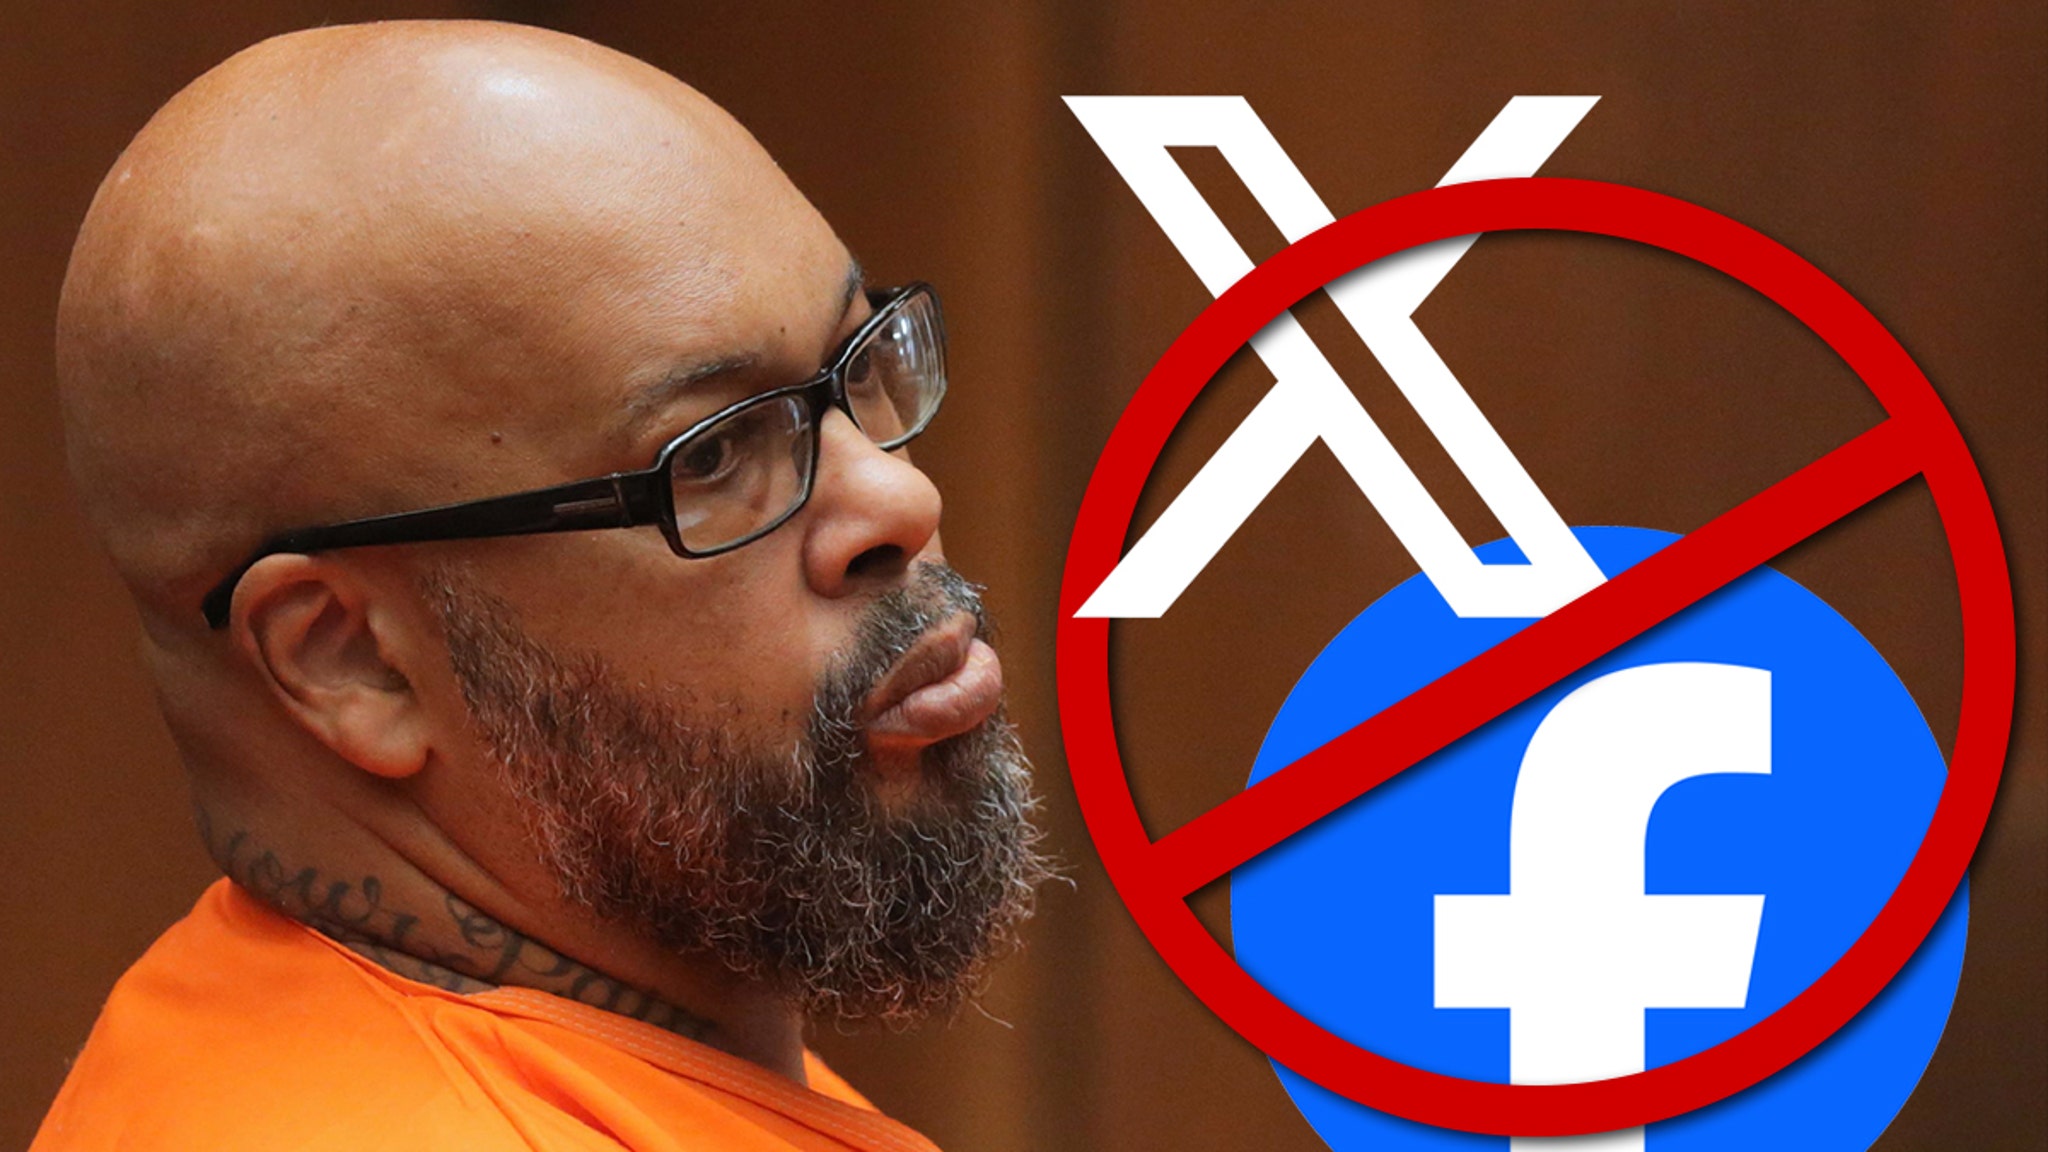 Suge Knight Says Twitter, Facebook Accounts Are Fake, Denies Dissing Snoop